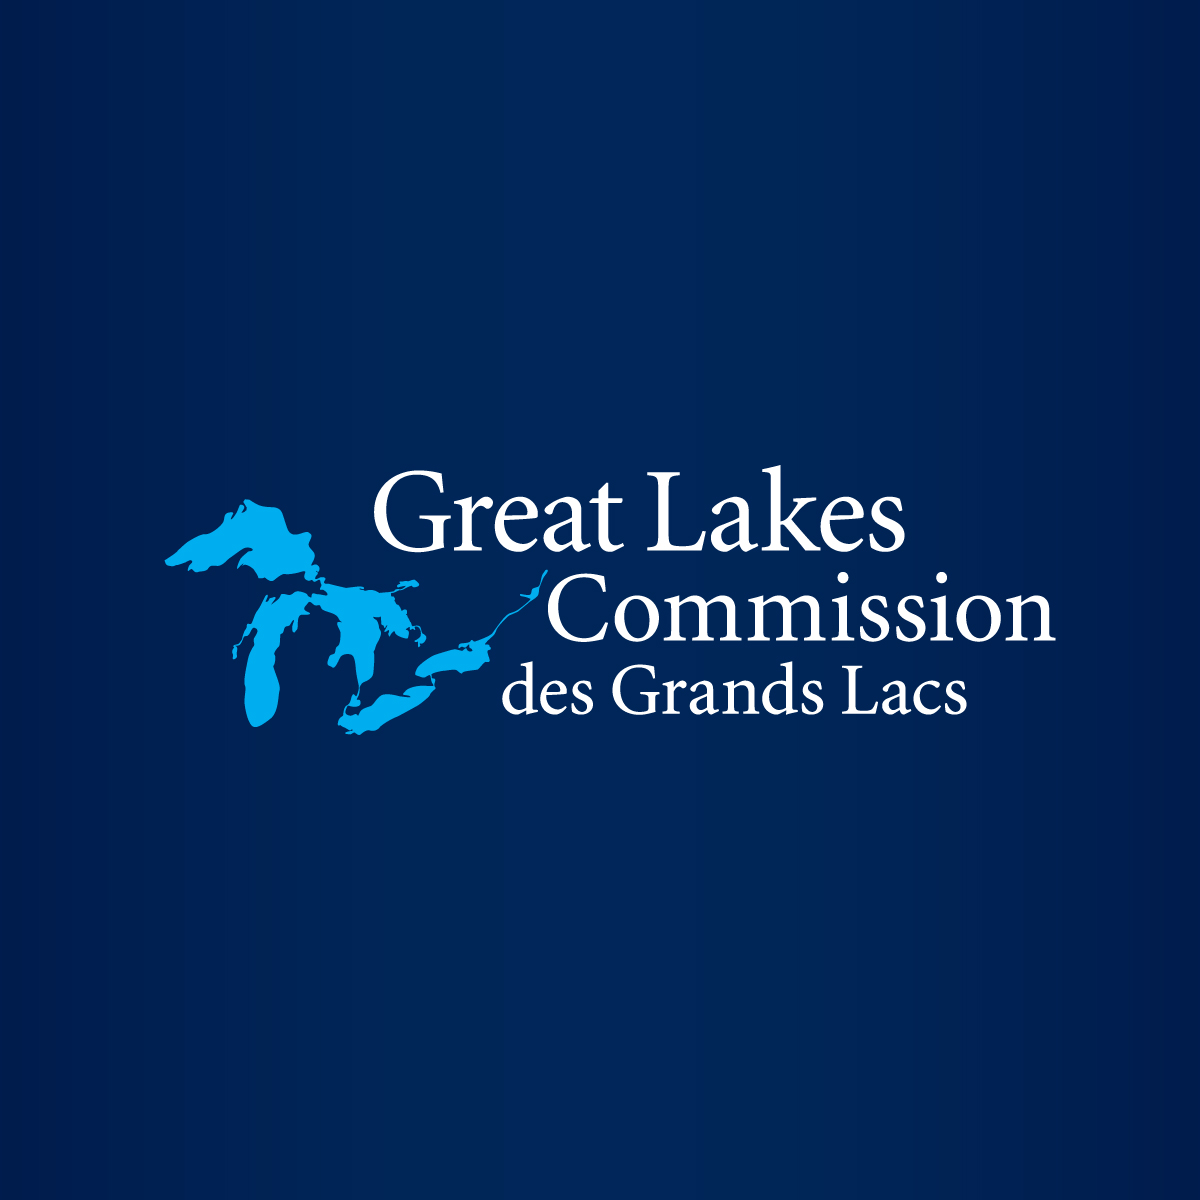 Great Lakes scientists dive into winter research